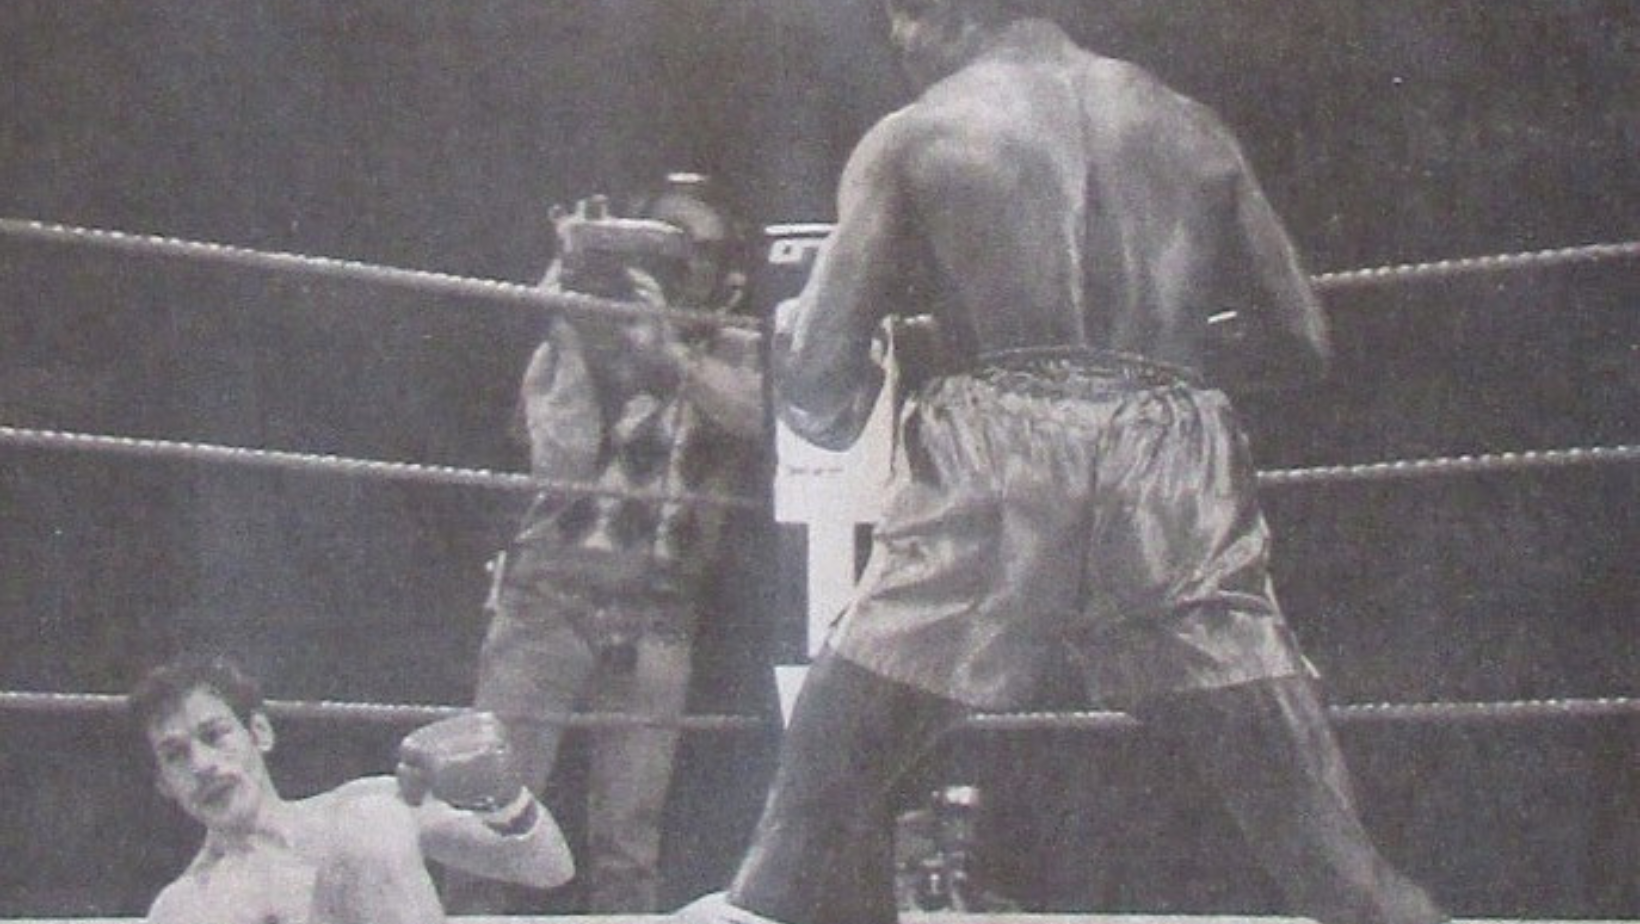 A day like today, Azumah Nelson knocked out Briton Pat Cowdell